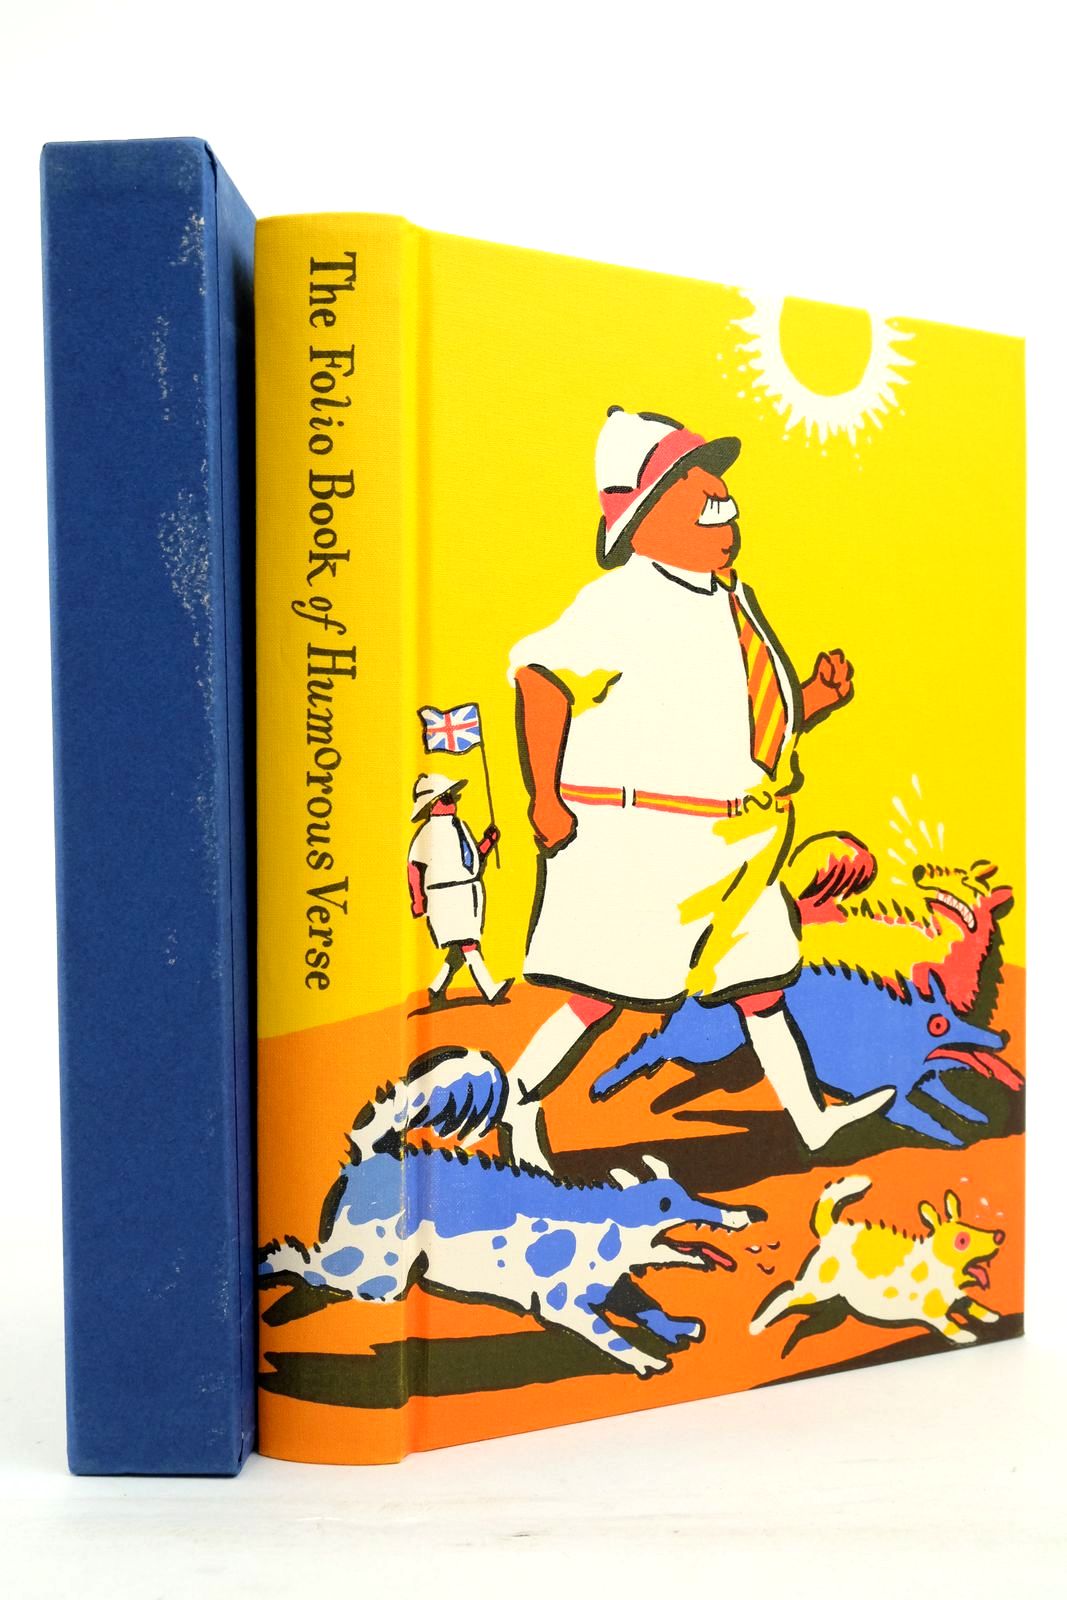 Photo of THE FOLIO BOOK OF HUMOROUS VERSE written by Leeson, Edward illustrated by Simmonds, Posy published by Folio Society (STOCK CODE: 2138115)  for sale by Stella & Rose's Books